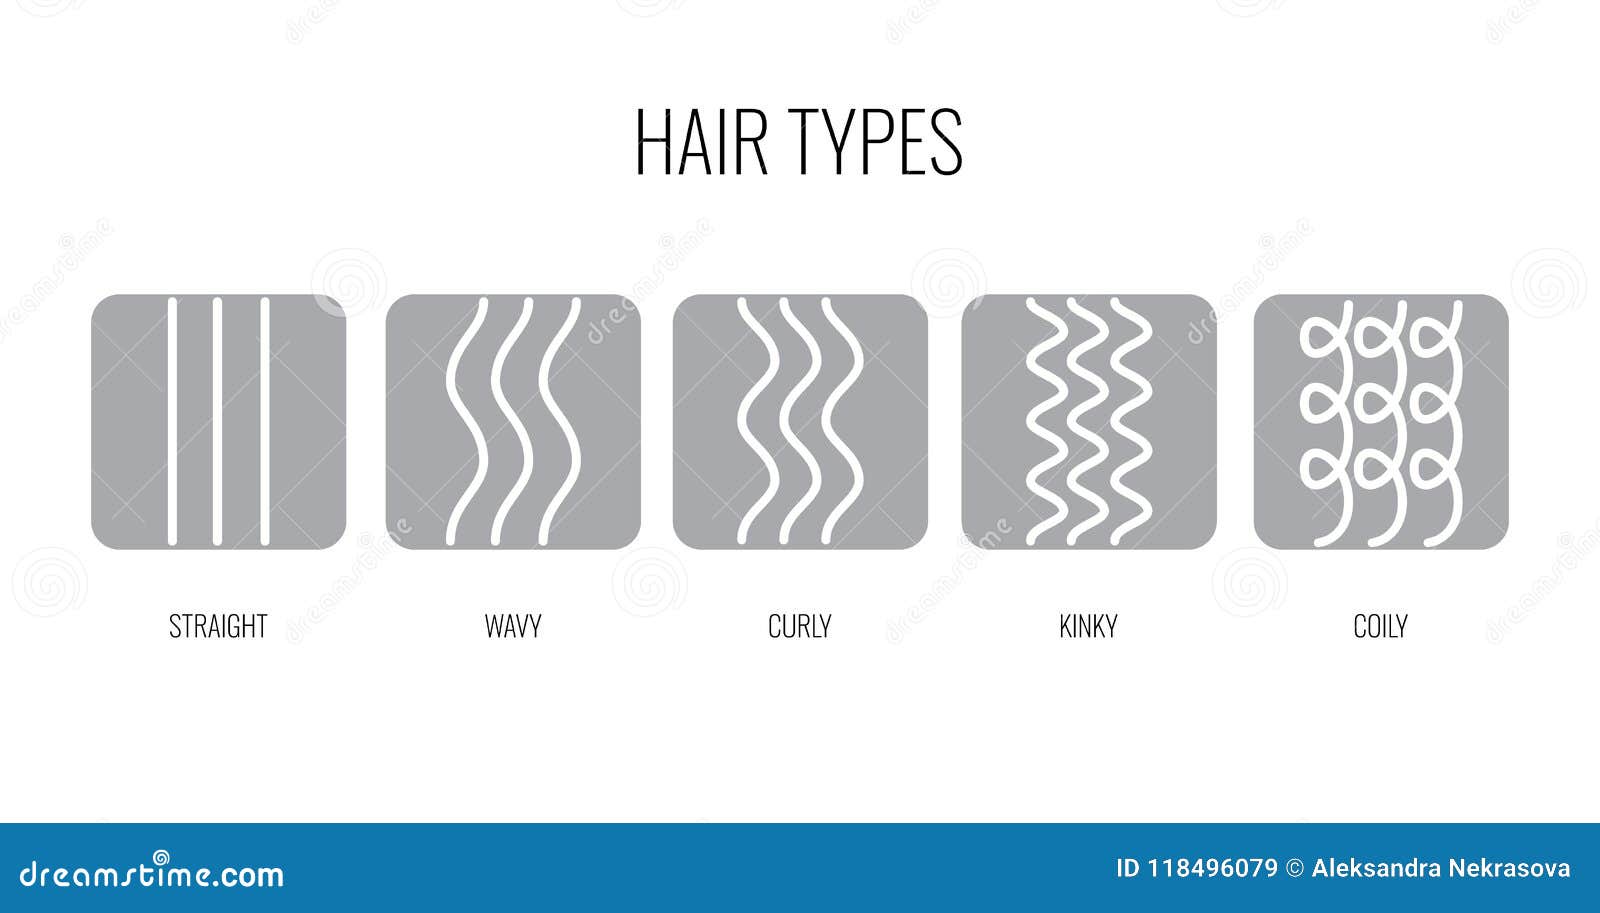   of a hair types chart displaying all types and labeled.